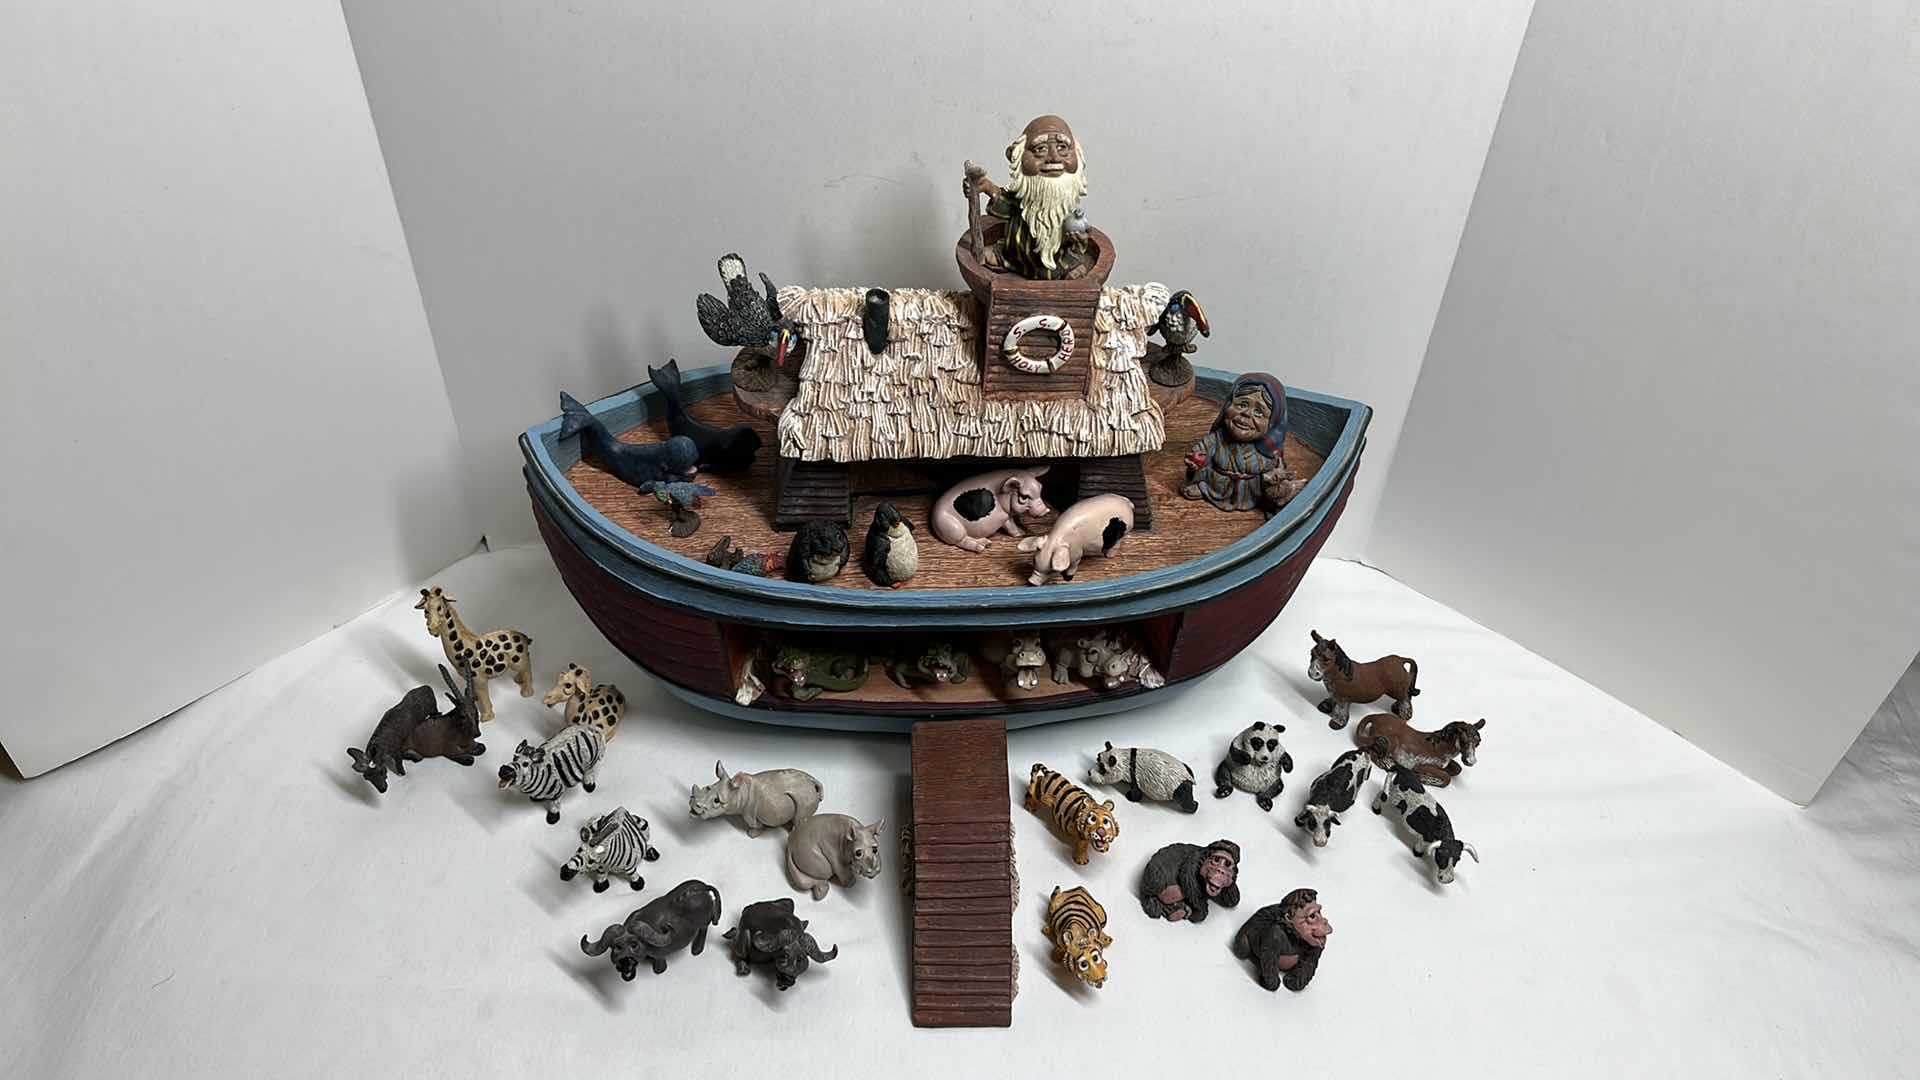 Photo 1 of NOAH’S ARK S.S. HOLY HERD COLLECTIBLES W NOAH & HIS WIFE & 34 ANIMAL FIGURINES 8.25” X 18.5” H12.5”